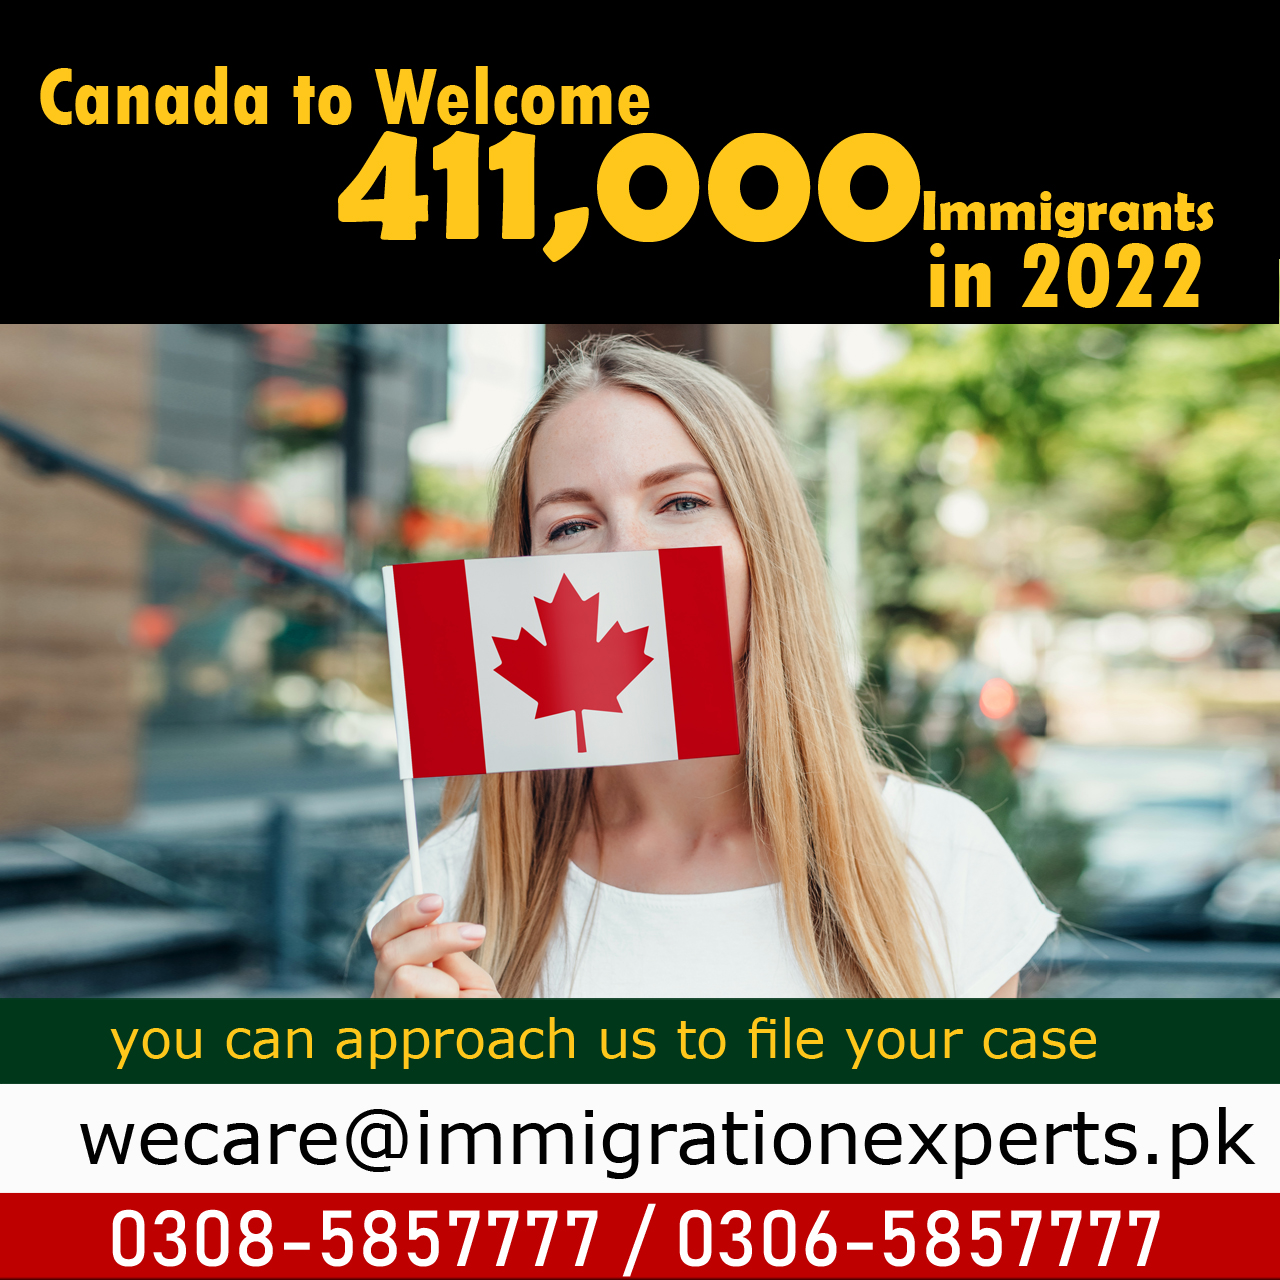 Canada to target 411,000 immigrants in 2022